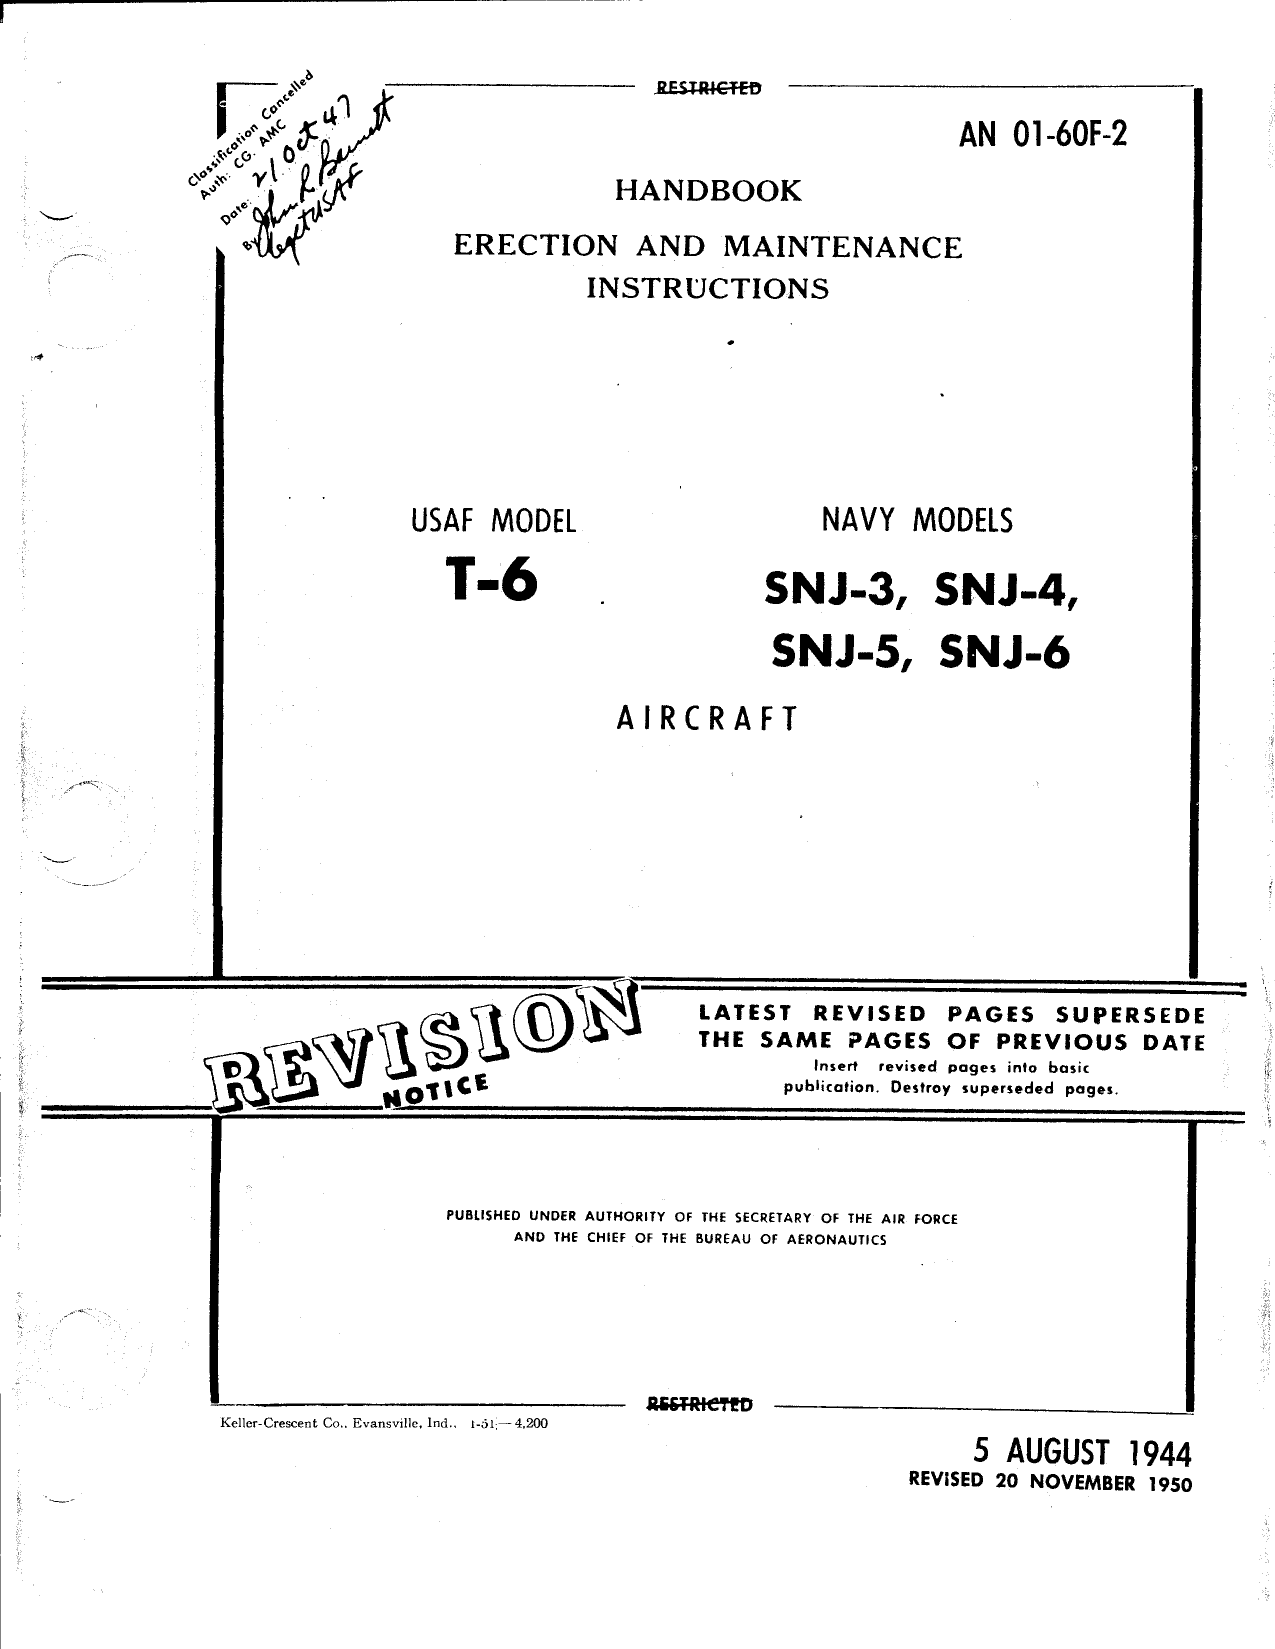 Sample page 6 from AirCorps Library document: Erection and Maintenance Instructions for T-6, SNJ-3, SNJ-4, SNJ-5, and SNJ-6 Aircraft